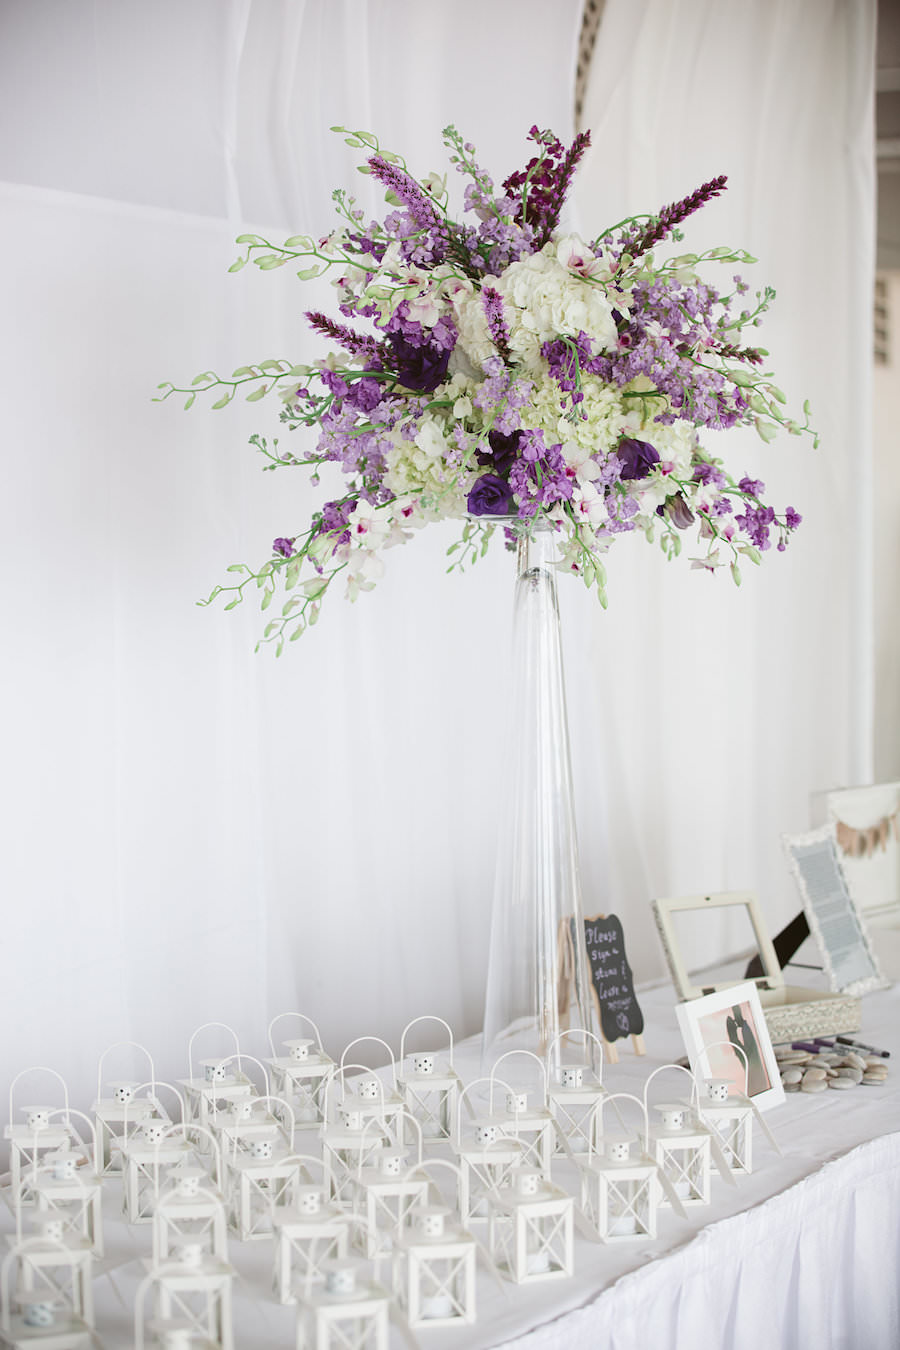 Tall Wedding Reception Decor Centerpieces with Lanterns Purple and White Wedding Flowers | Clearwater Beach Wedding Florist Iza's Flowers | Wedding Venue Hilton Clearwater Beach